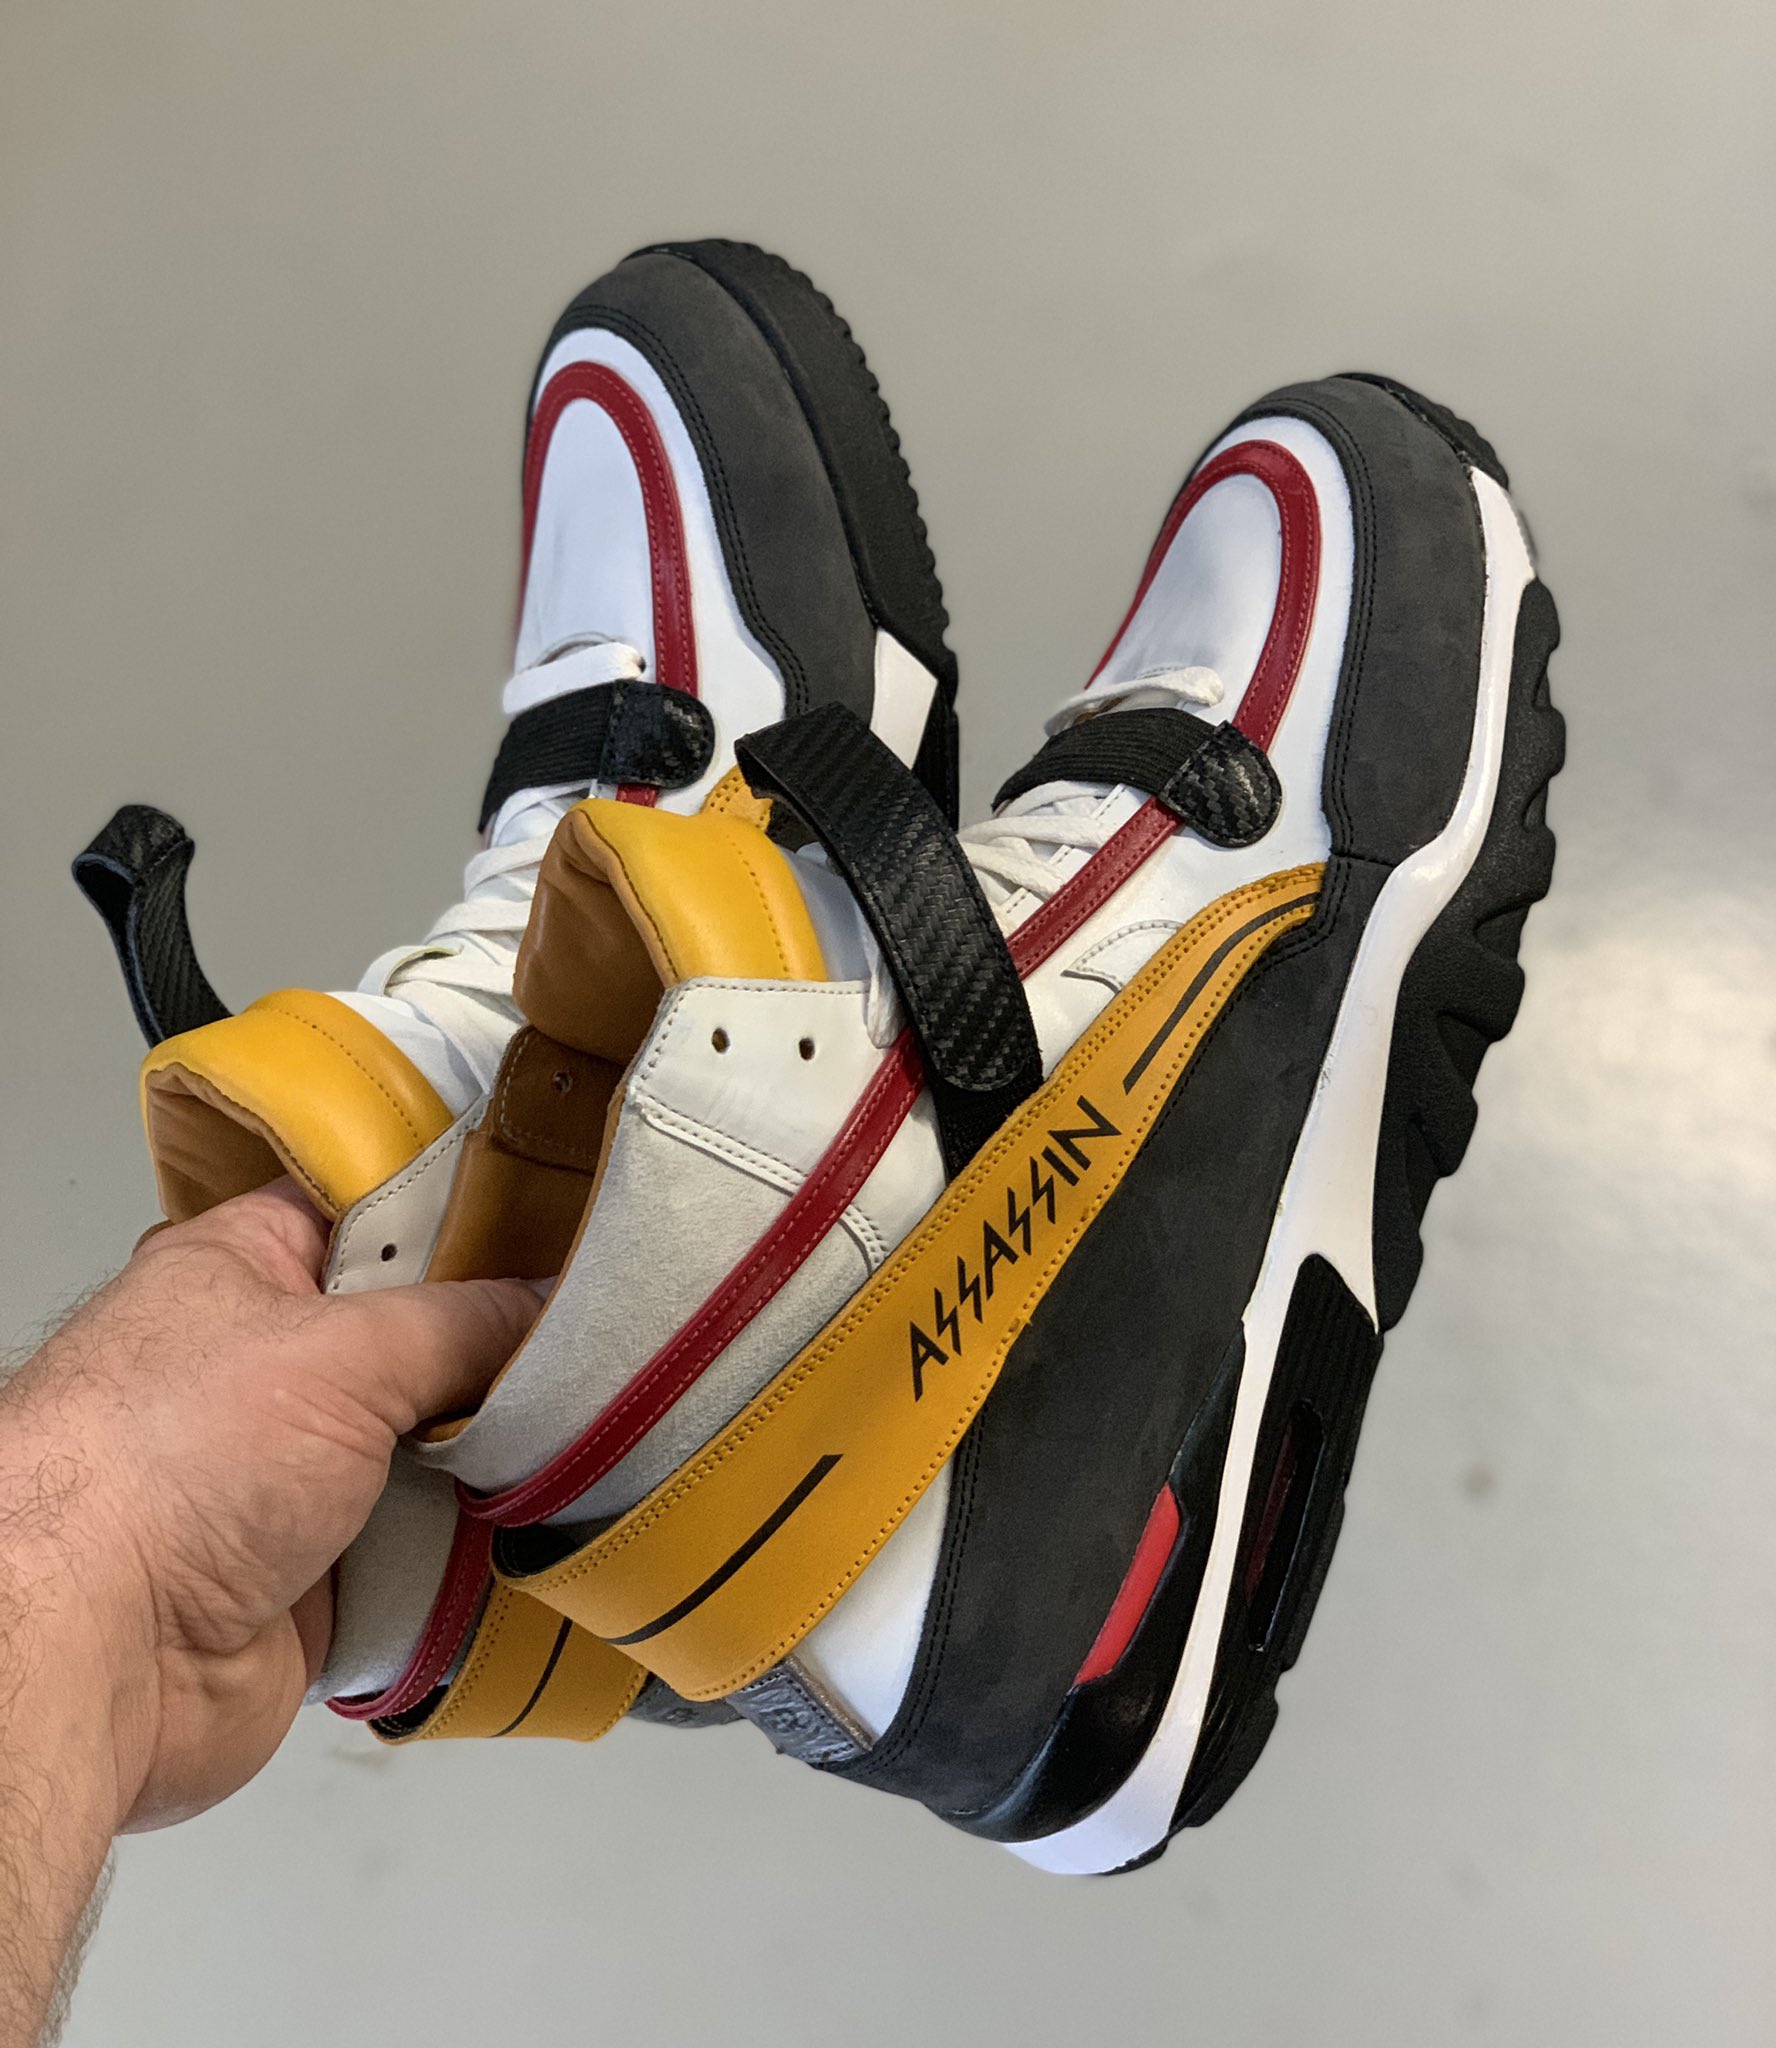 Mache on Twitter: "My friend @JBFcustoms and I have talked about recreating the Assassins sneaker from @TheSimpsons for now. When I visited him a few months back we put the wheels